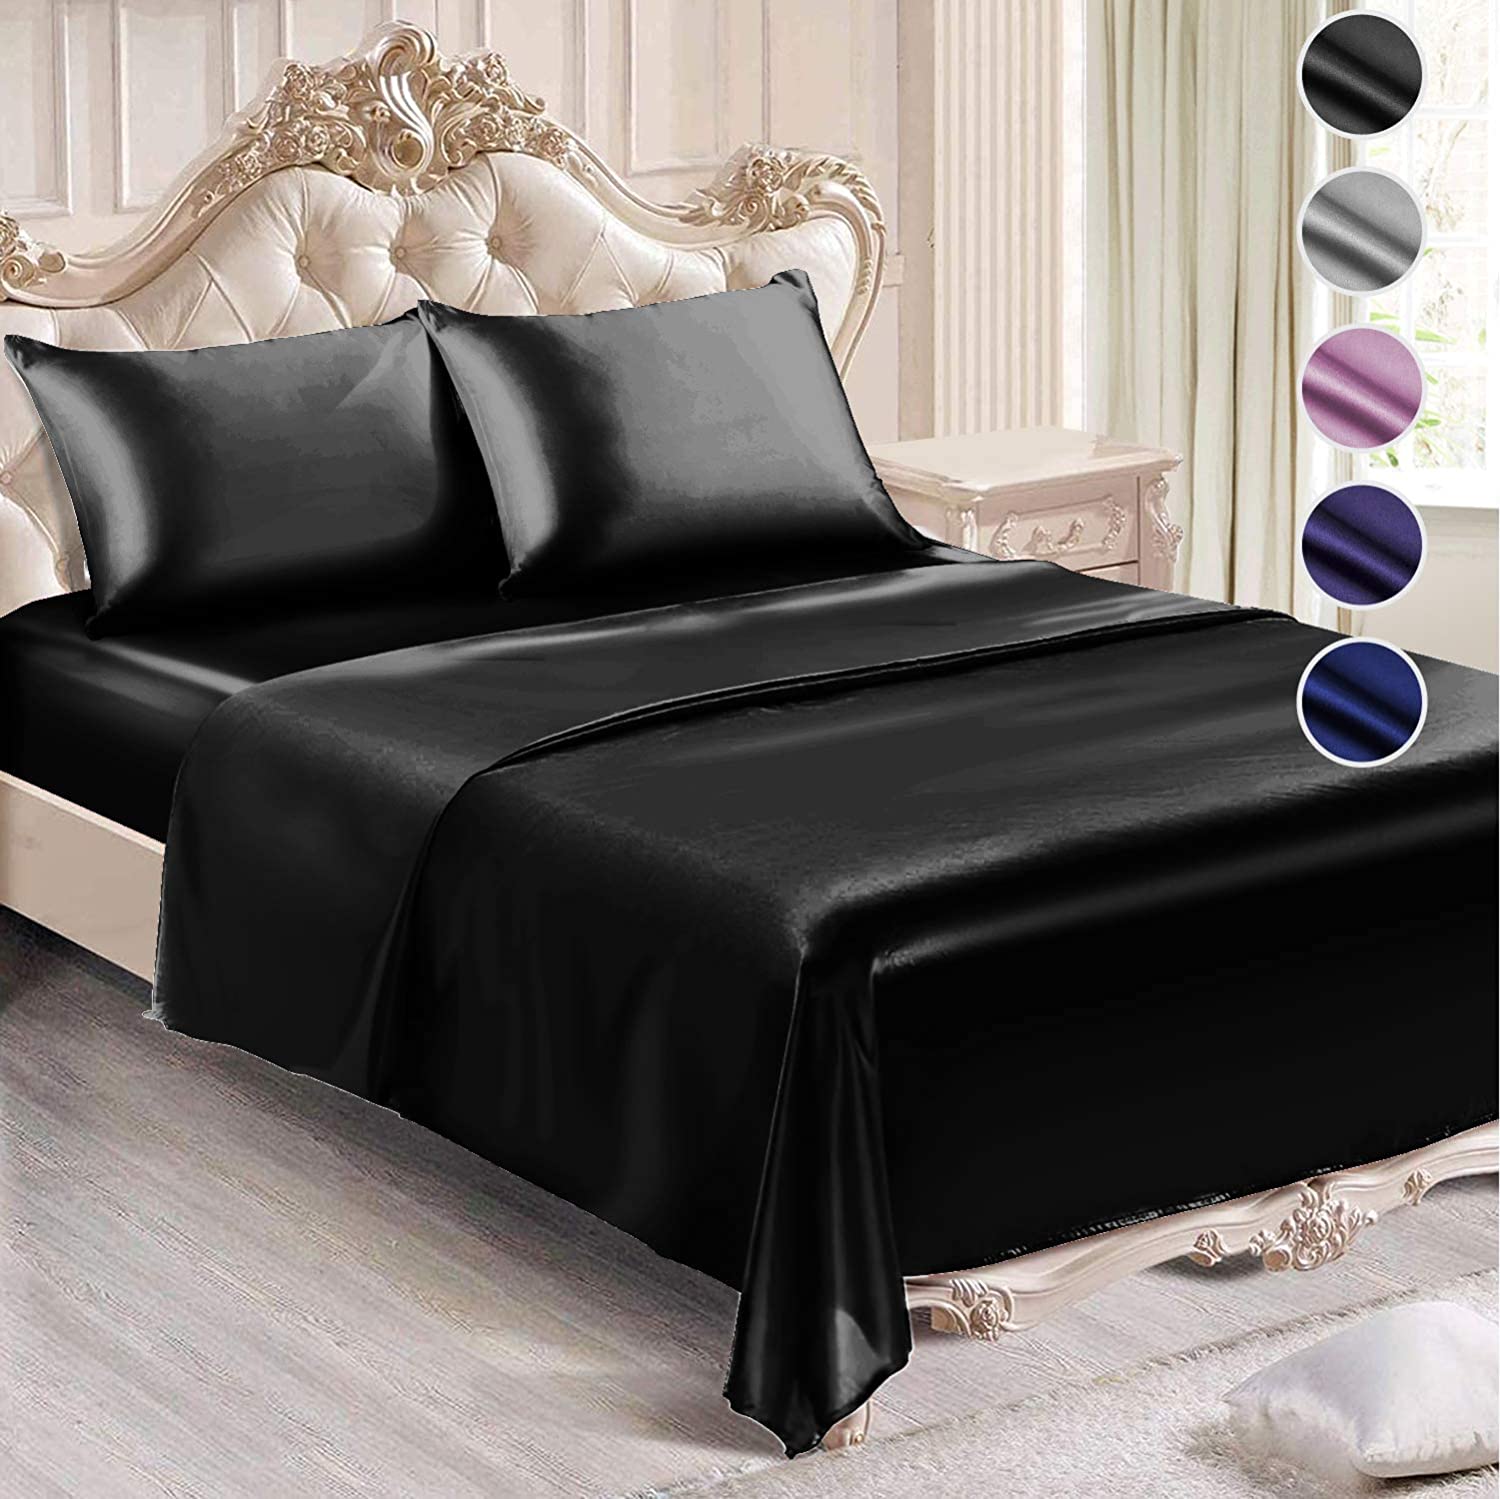 Details about   RUDONMG 4 Piece Rust Satin Sheets Queen Size Satin Bed Sheets Set Silky Satin Sh 